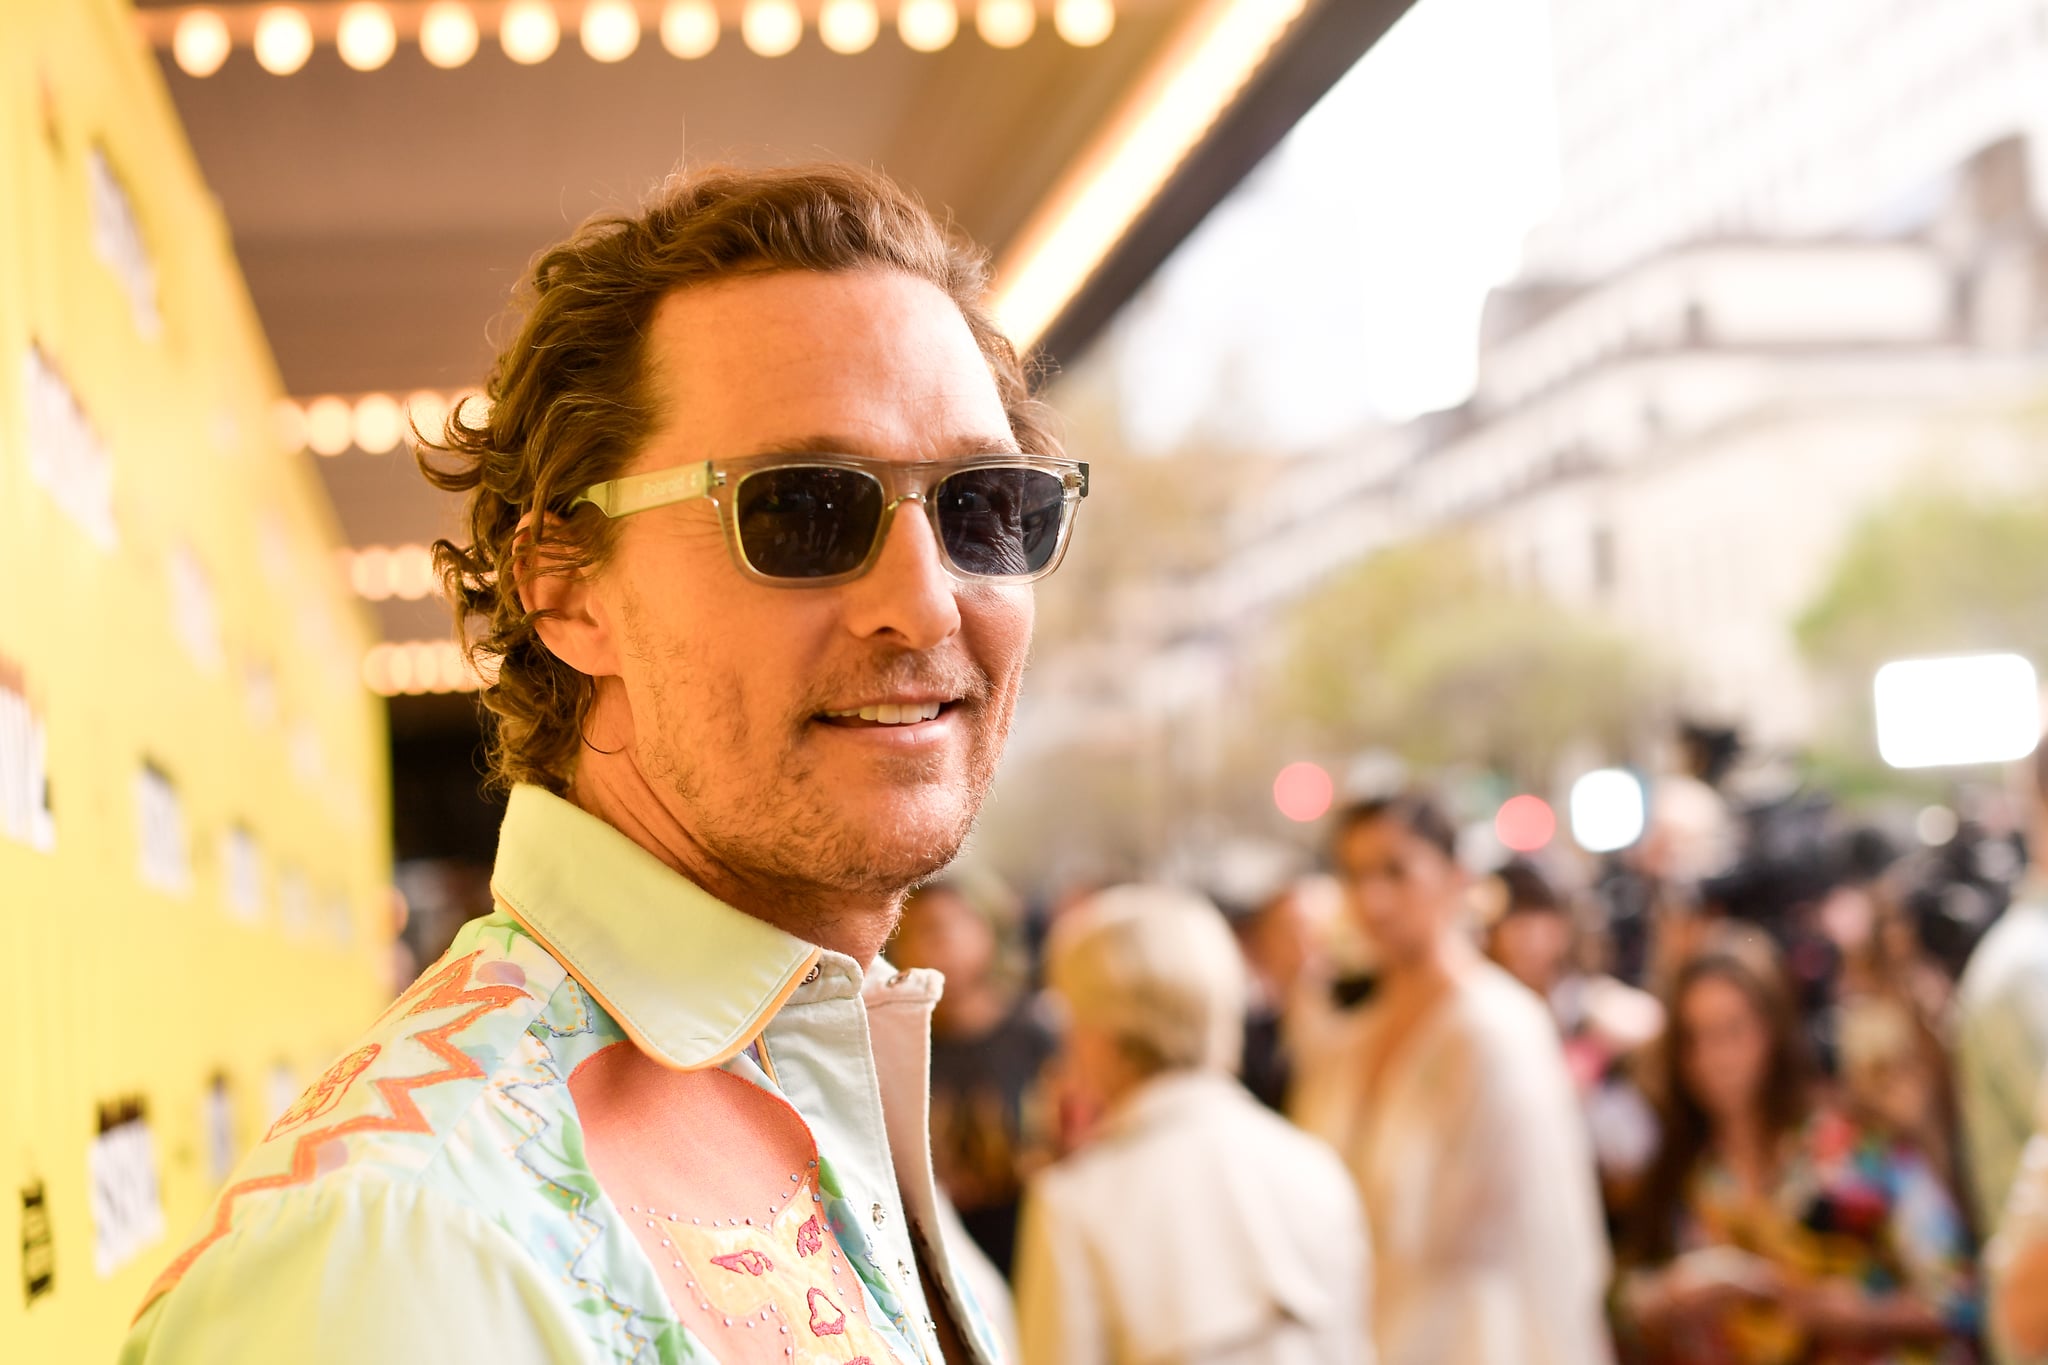 AUSTIN, TEXAS - MARCH 09: Matthew McConaughey attends the